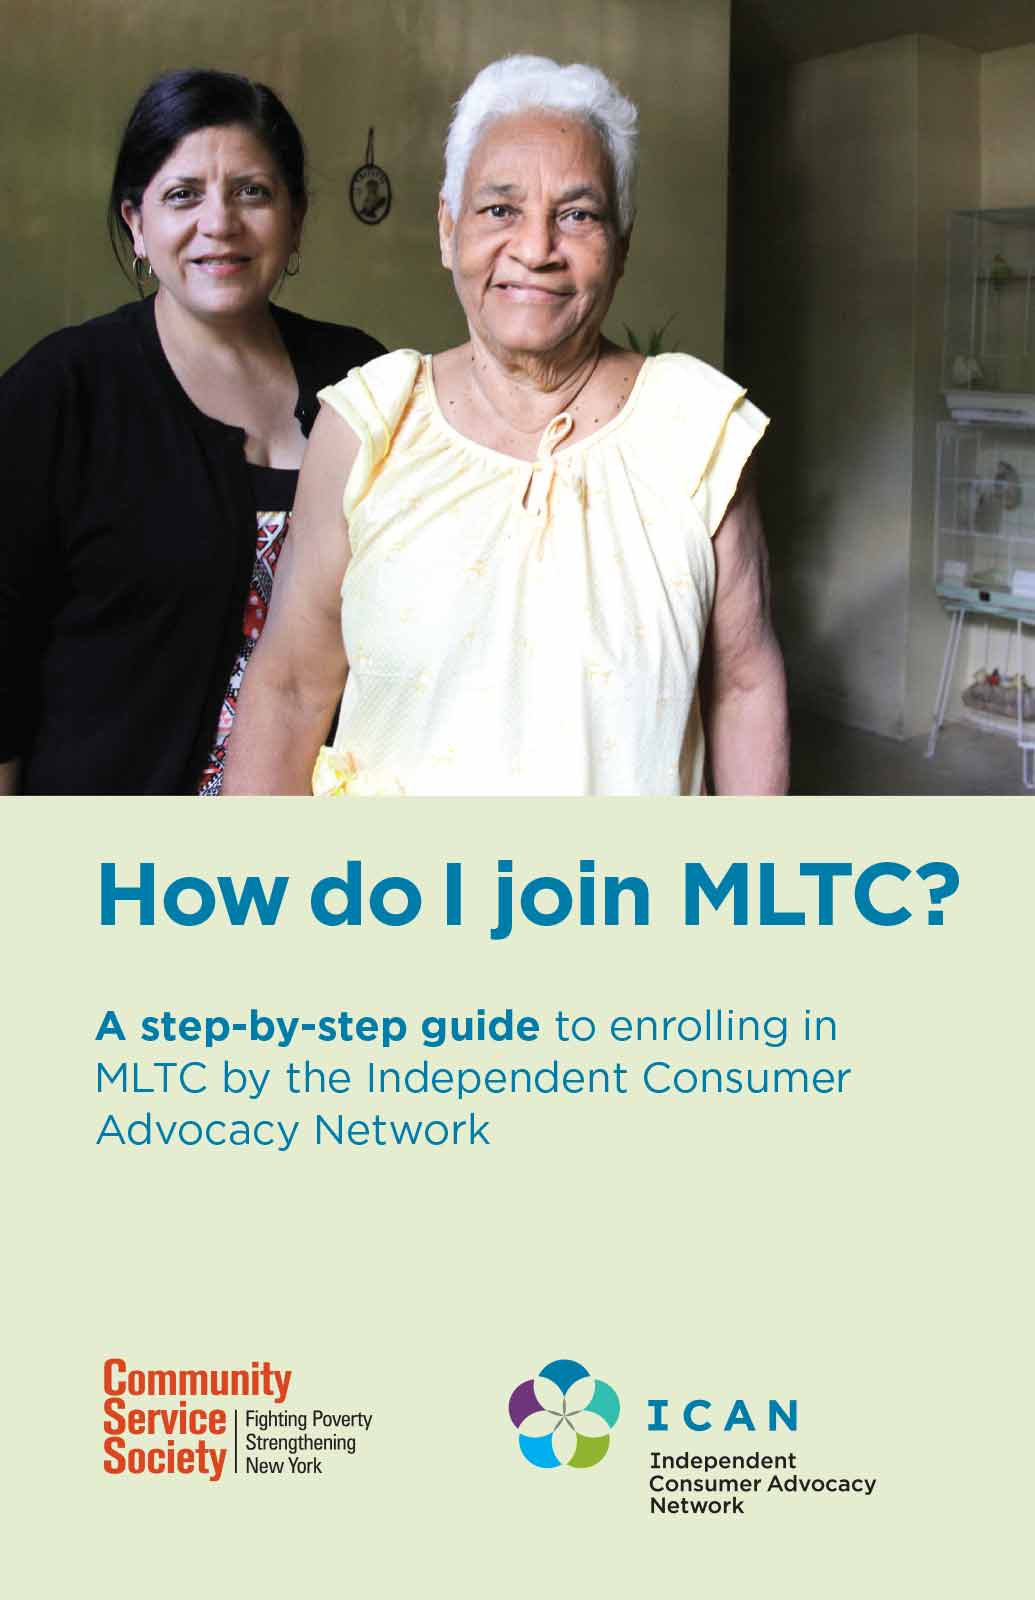 How Do I Join MLTC? booklet cover